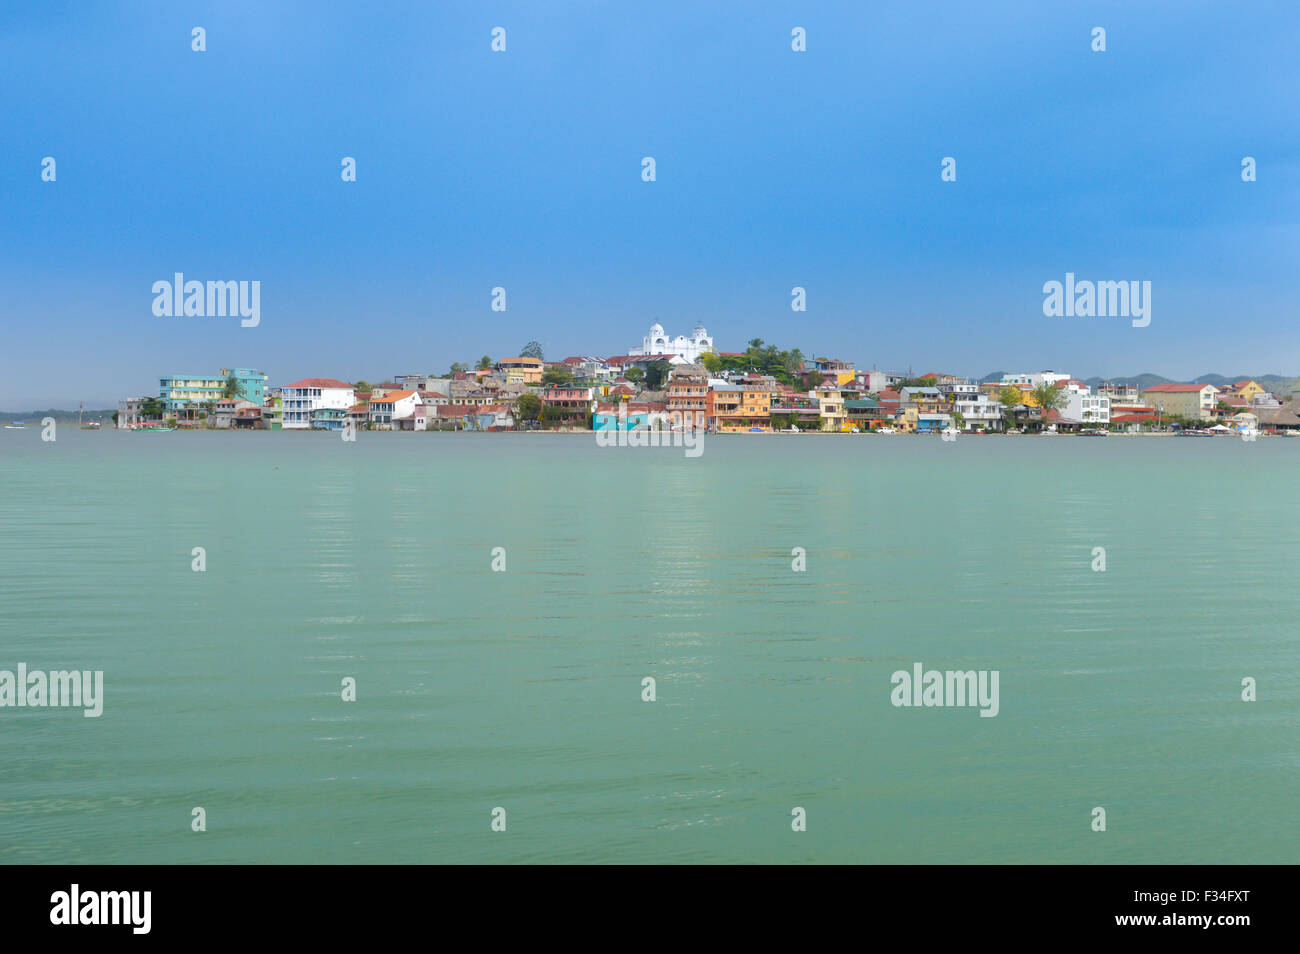 The view of the town of Flores seen from the boat on the lake Peten Itza, Guatemala Stock Photo